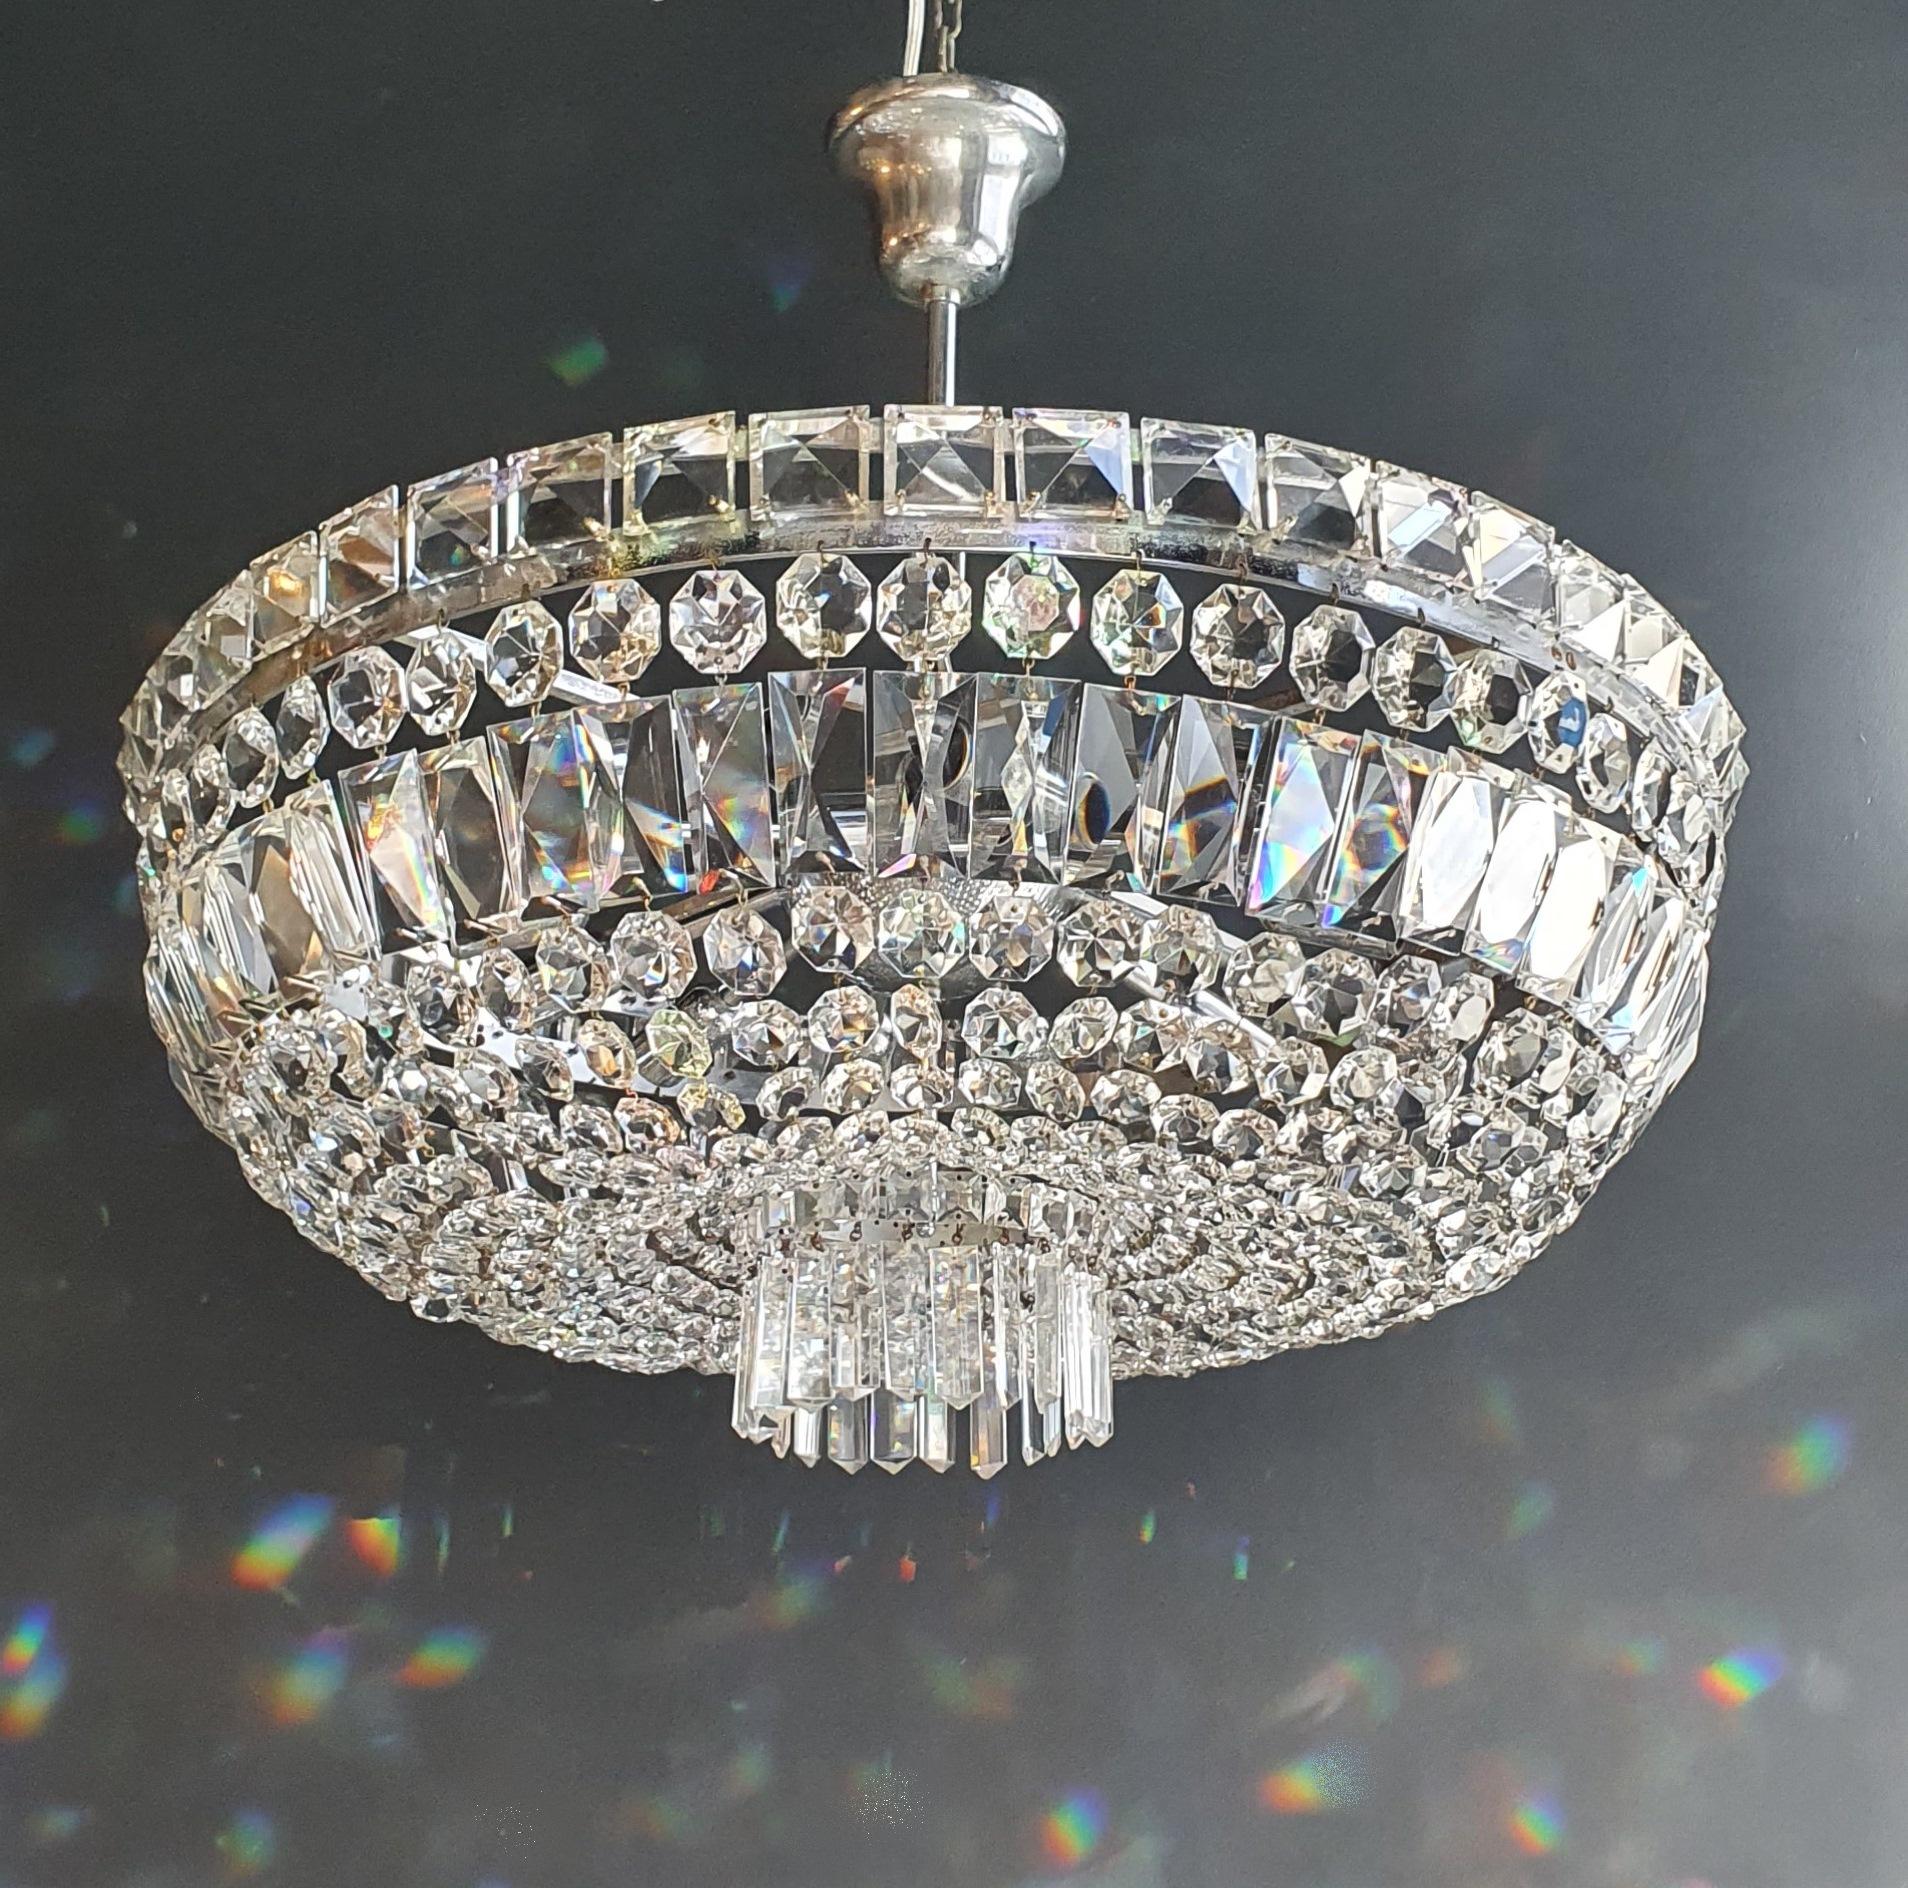 Introducing our exquisite antique chandelier, lovingly and professionally restored in Berlin. This stunning piece features electrical wiring that is compatible with the US, as it has been carefully re-wired and made ready to hang. Rest assured, not